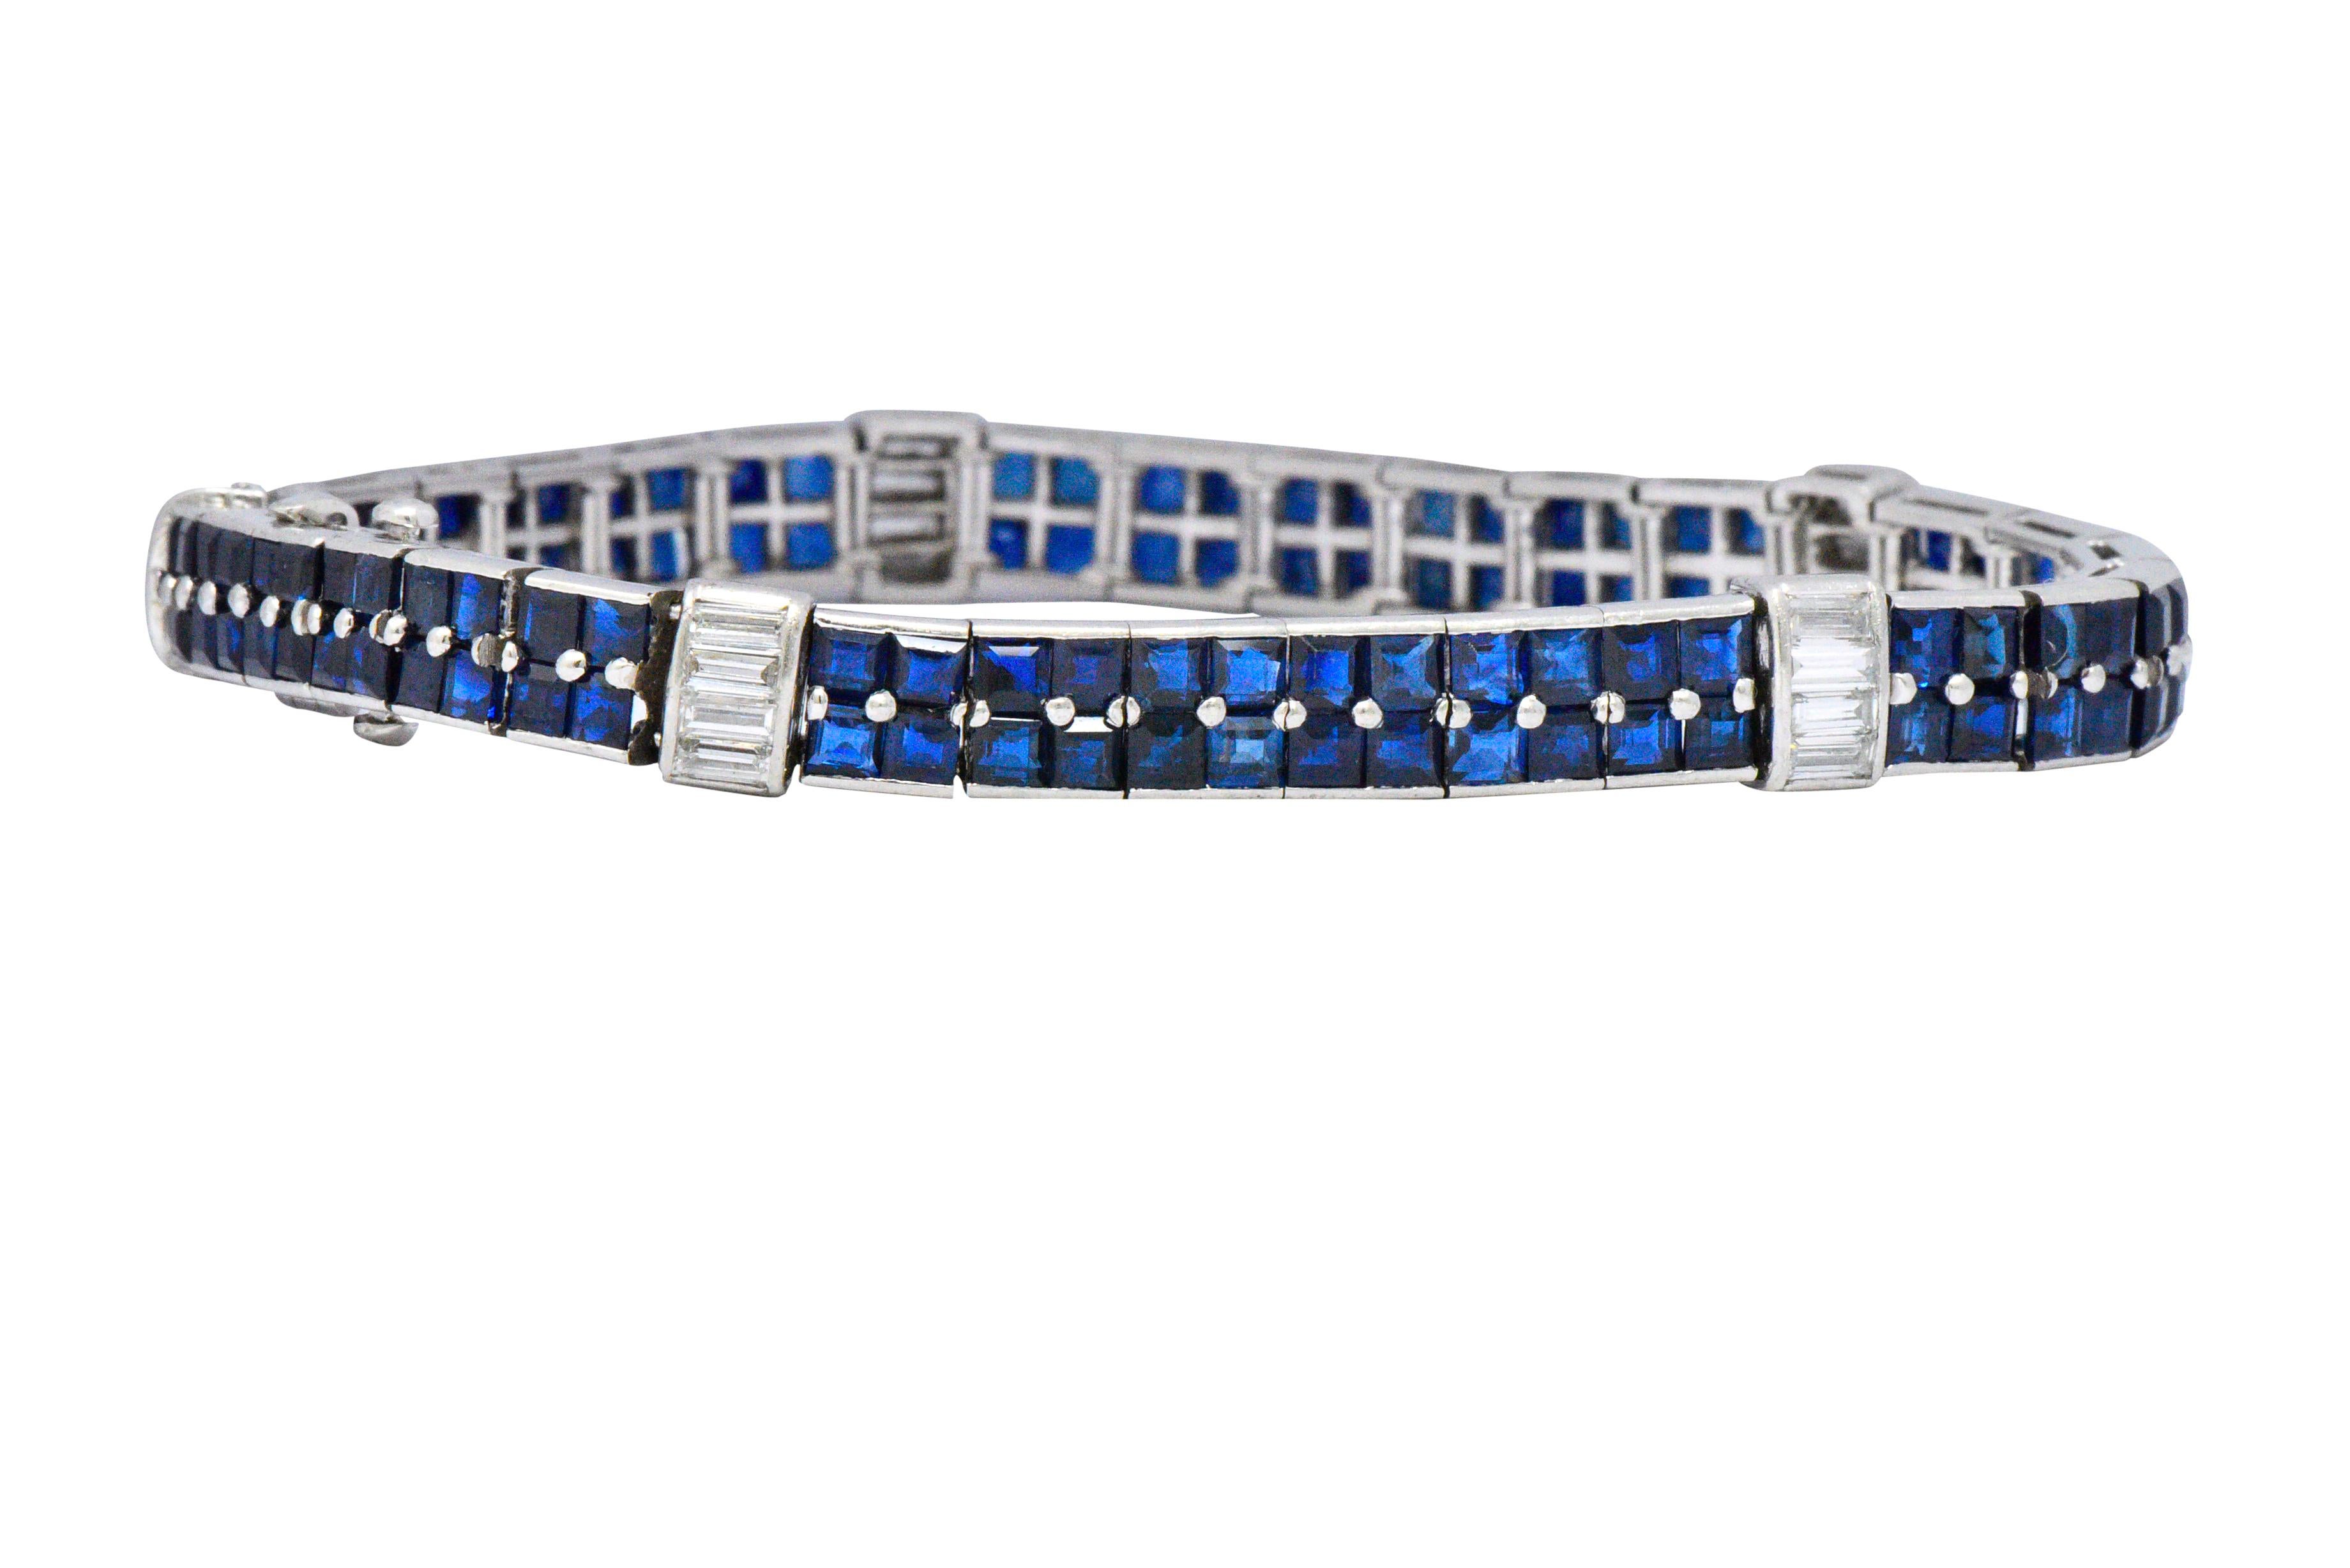 Set with 120 square cut natural sapphires, weighing approximately 14.50 carats total, bright deep blue and well matched

Accented by channel set baguette cut diamonds, weighing approximately 1.10 carats total, G/H color and VS to SI clarity

With a